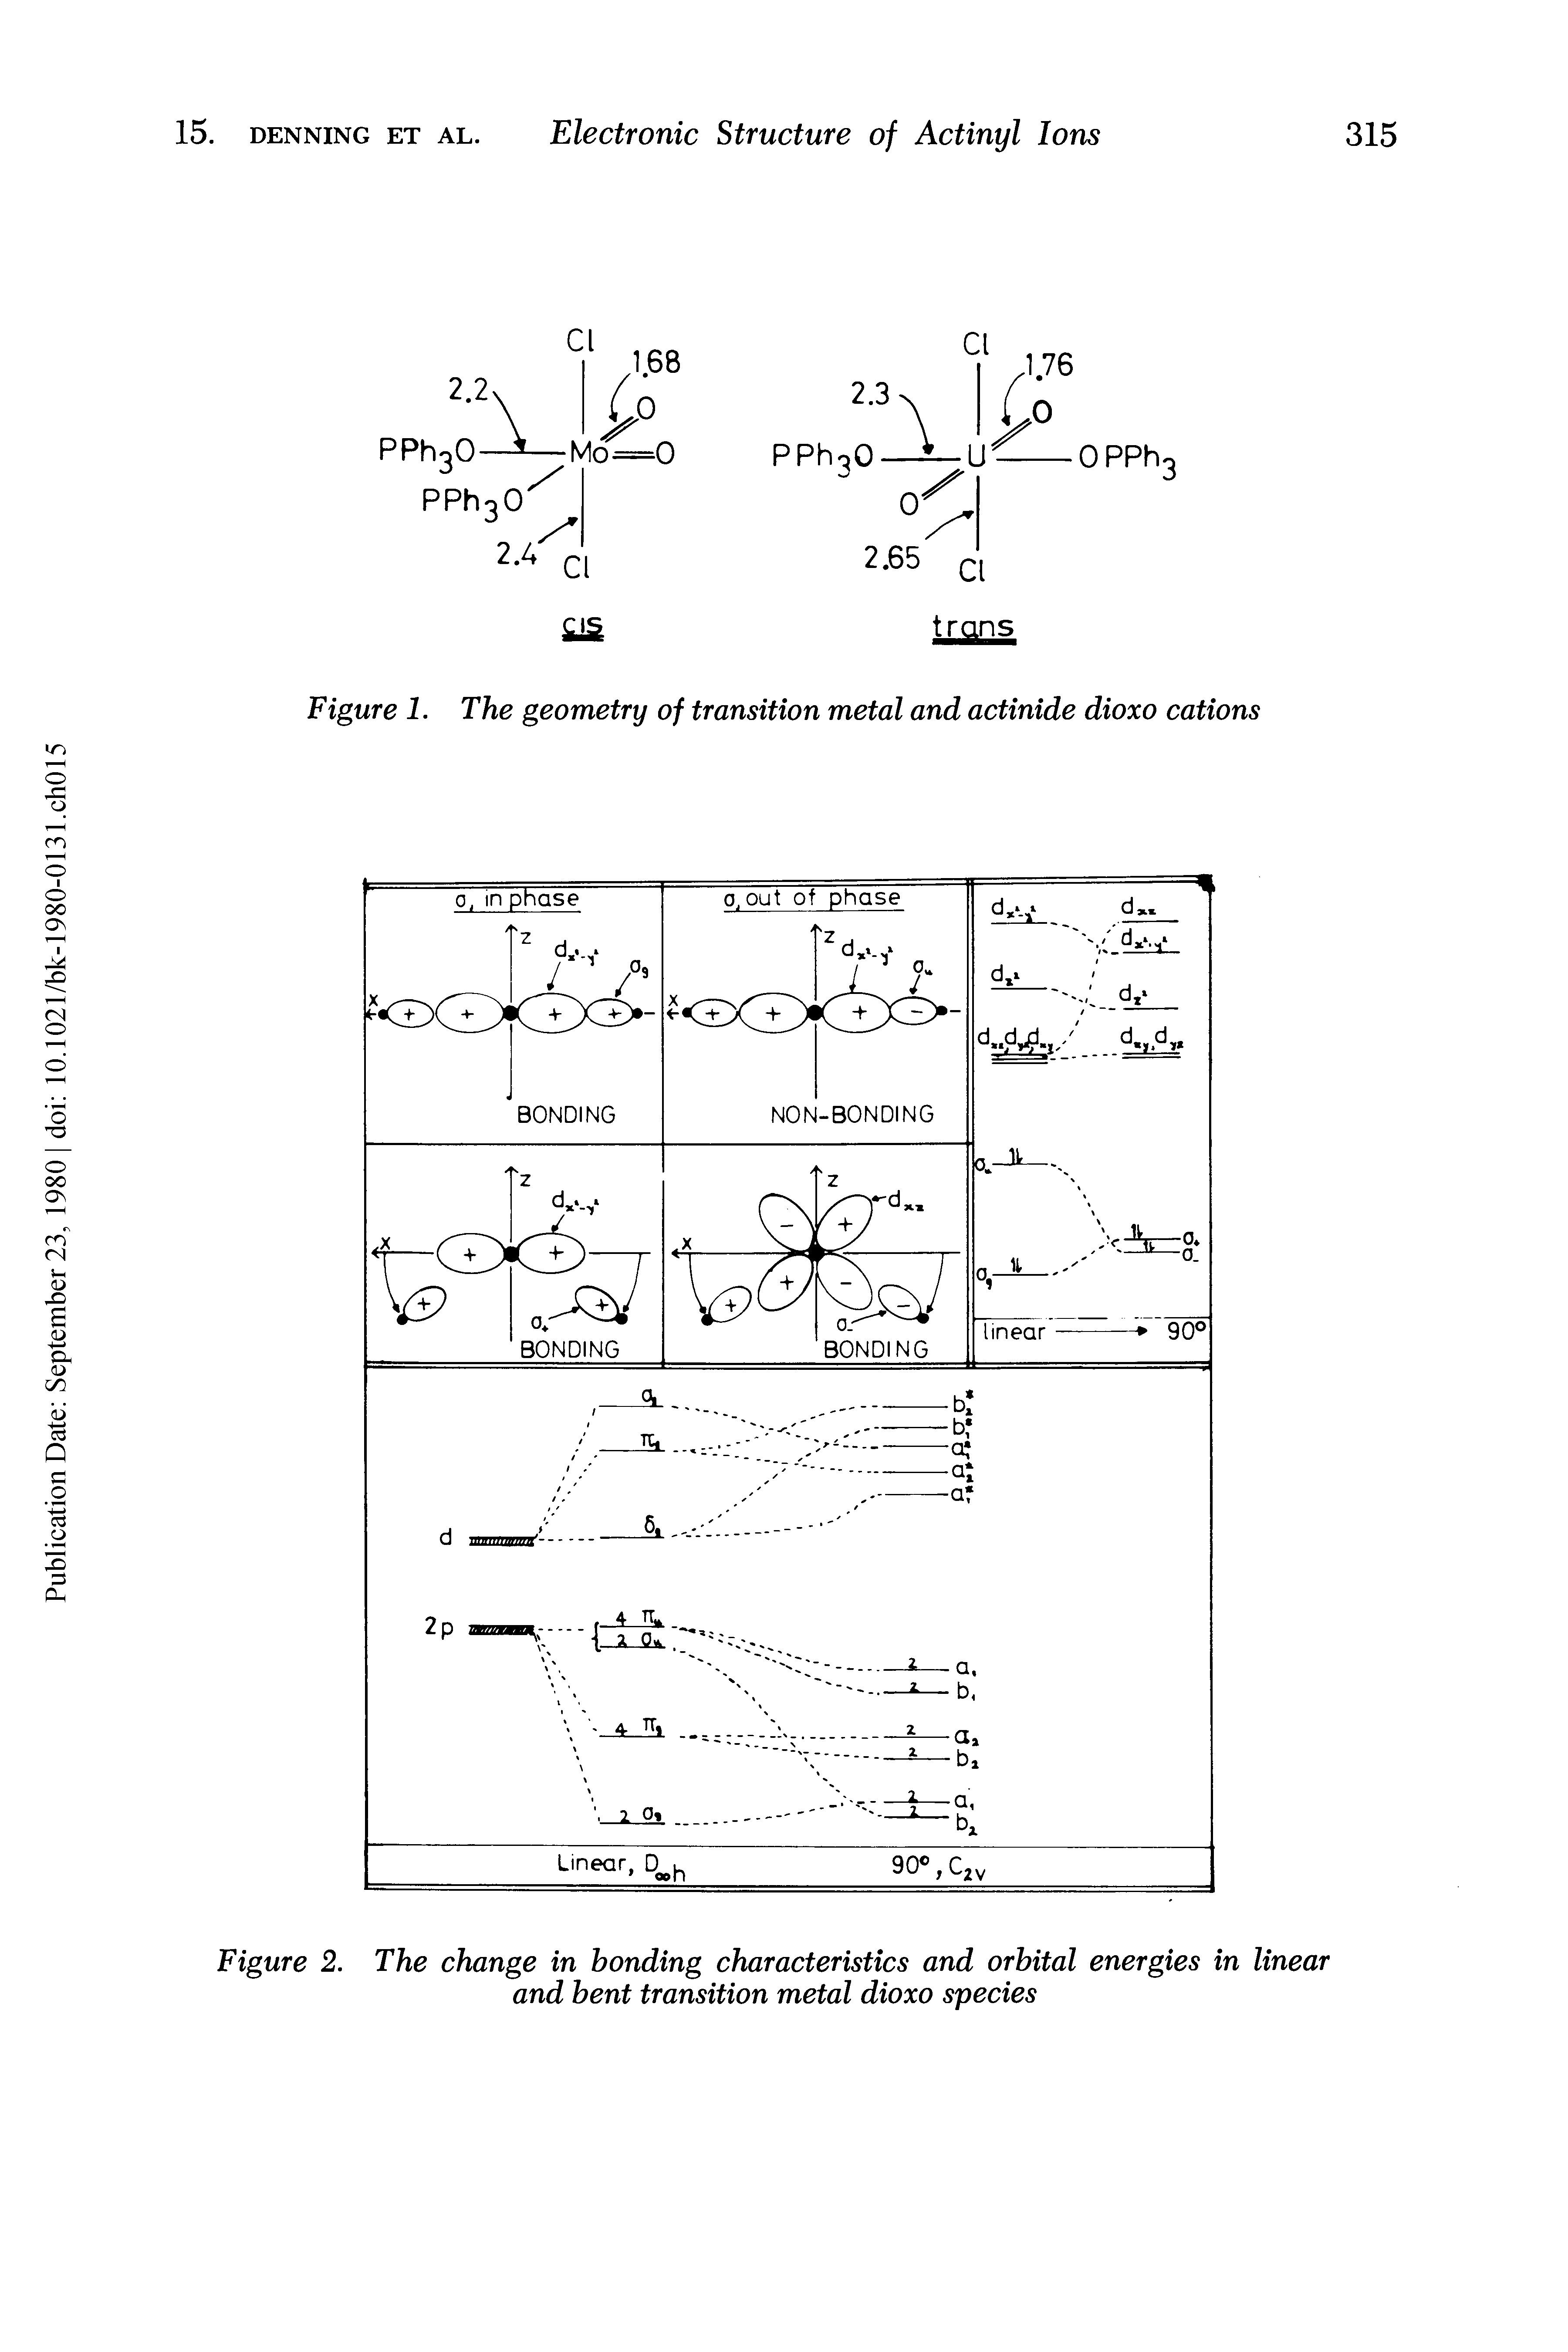 Figure 2. The change in bonding characteristics and orbital energies in linear and bent transition metal dioxo species...